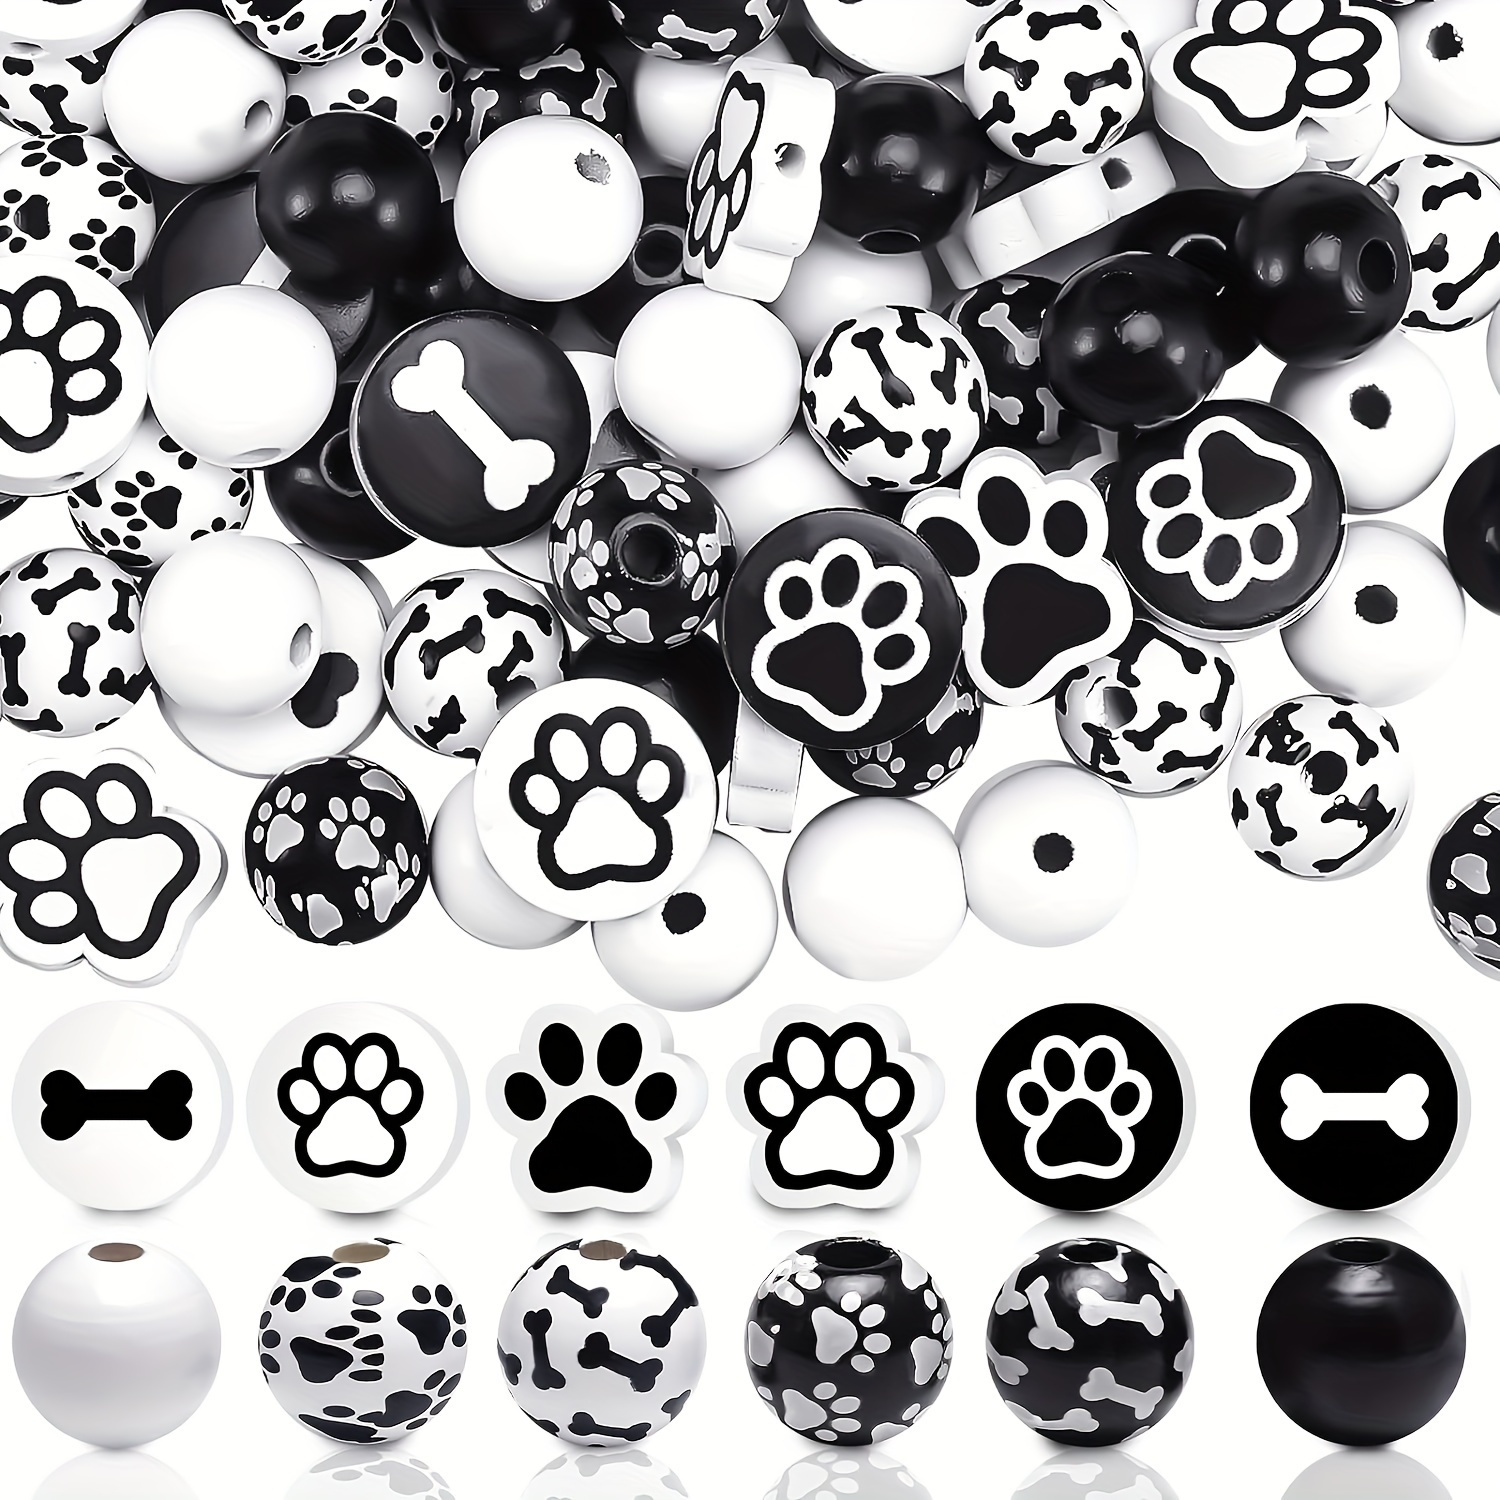 

70pcs Paw Wooden Beads, Dog Paw Cat Paw Footprint Beads, Vintage Black White Cute Spacer Beads Pendant For Jewelry Making, Diy Craft Party Home Decor Keychain Accessories